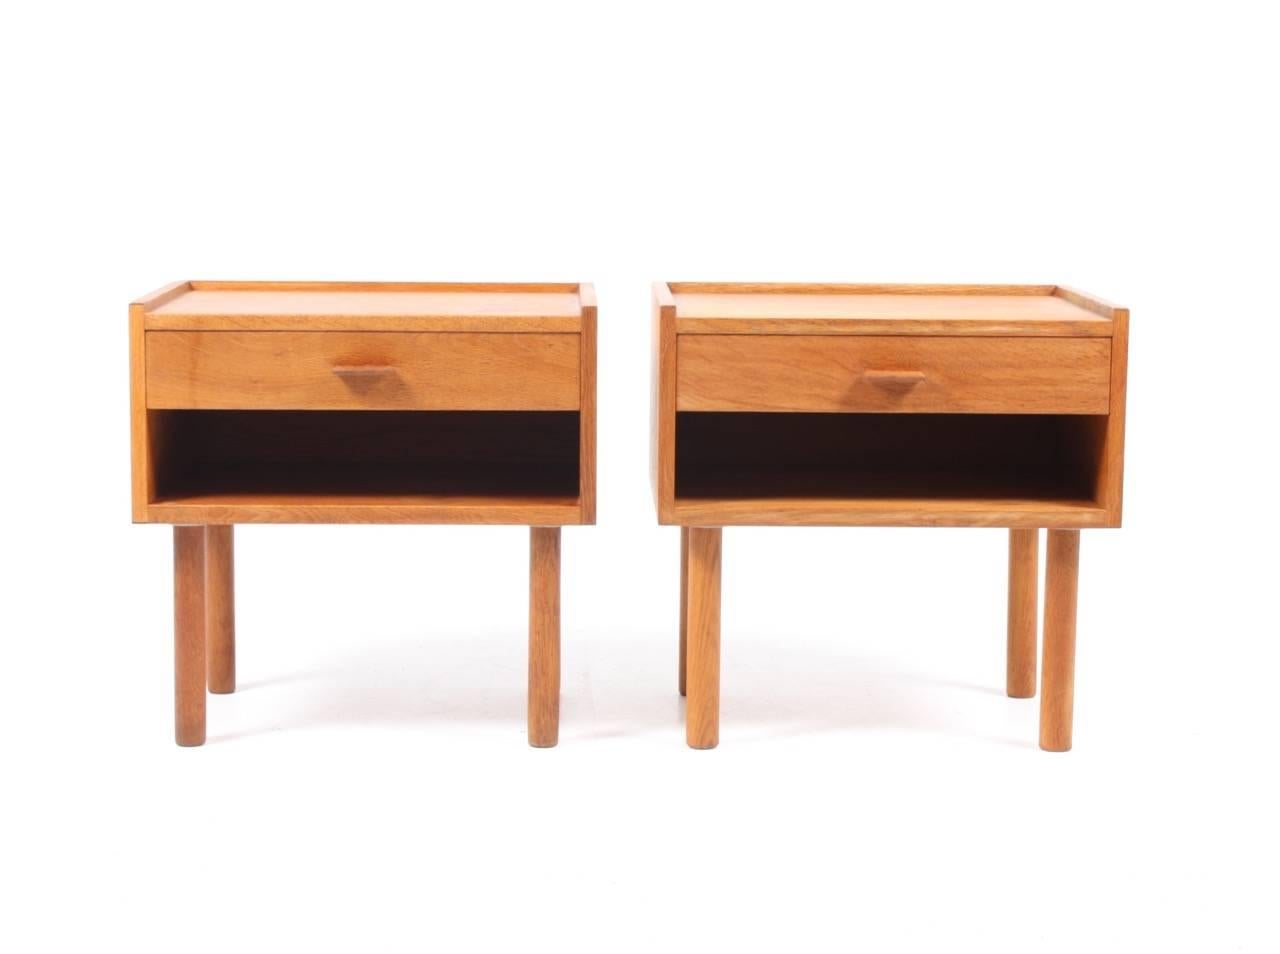 Pair of great looking nightstands in well patinated Scandinavian oak designed by Maa. Hans Wegner. Made by RY furniture Denmark in the 1960s. Very nice condition.